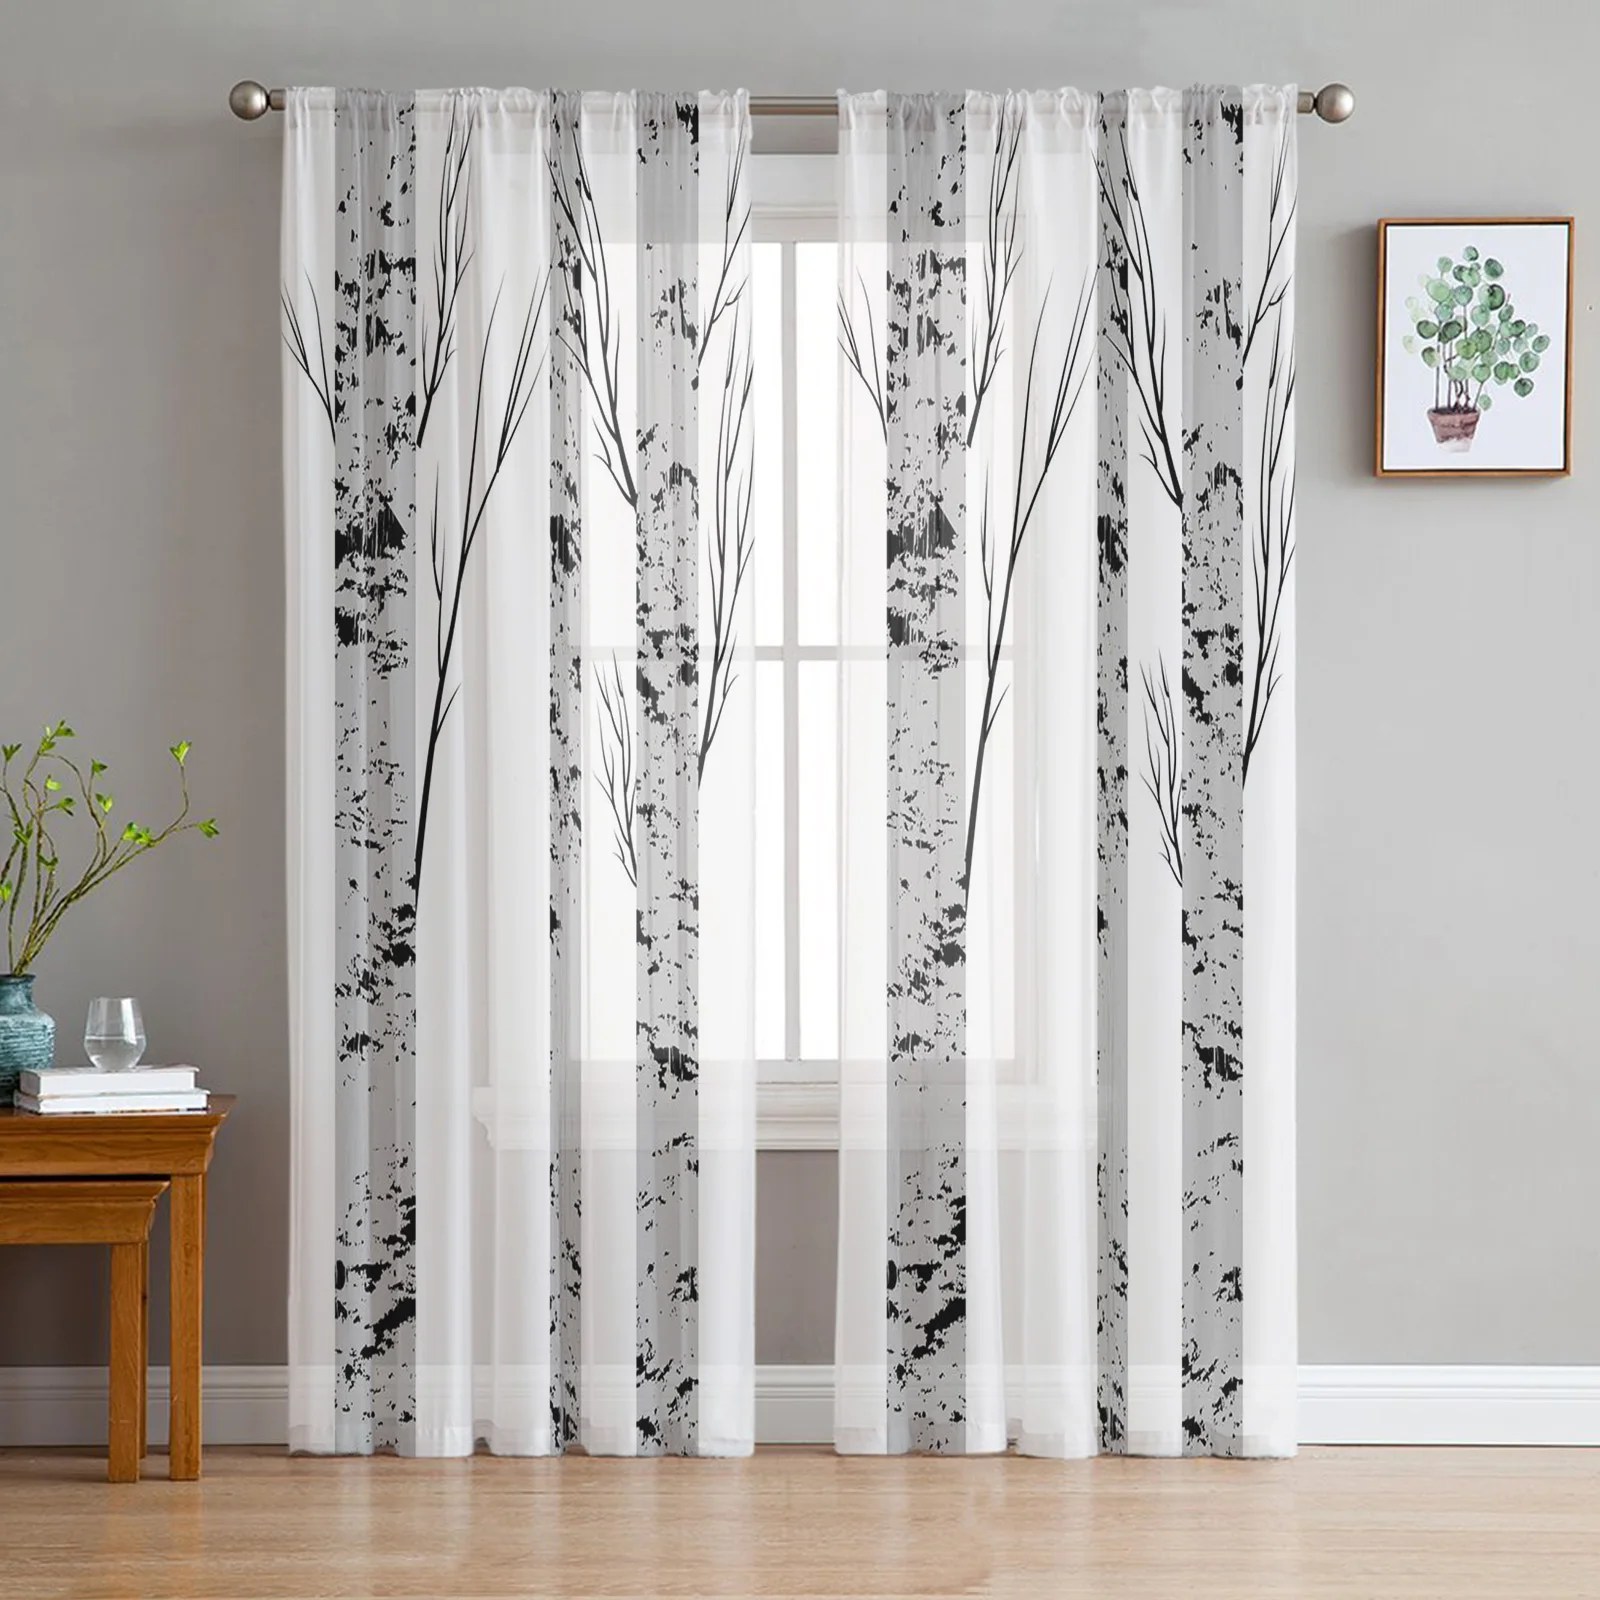 

White Grey Birch Forest Plant Sheer Curtain for Living Room Bedroom Voile Drape Kitchen Window Tulle Curtains Home Essentials